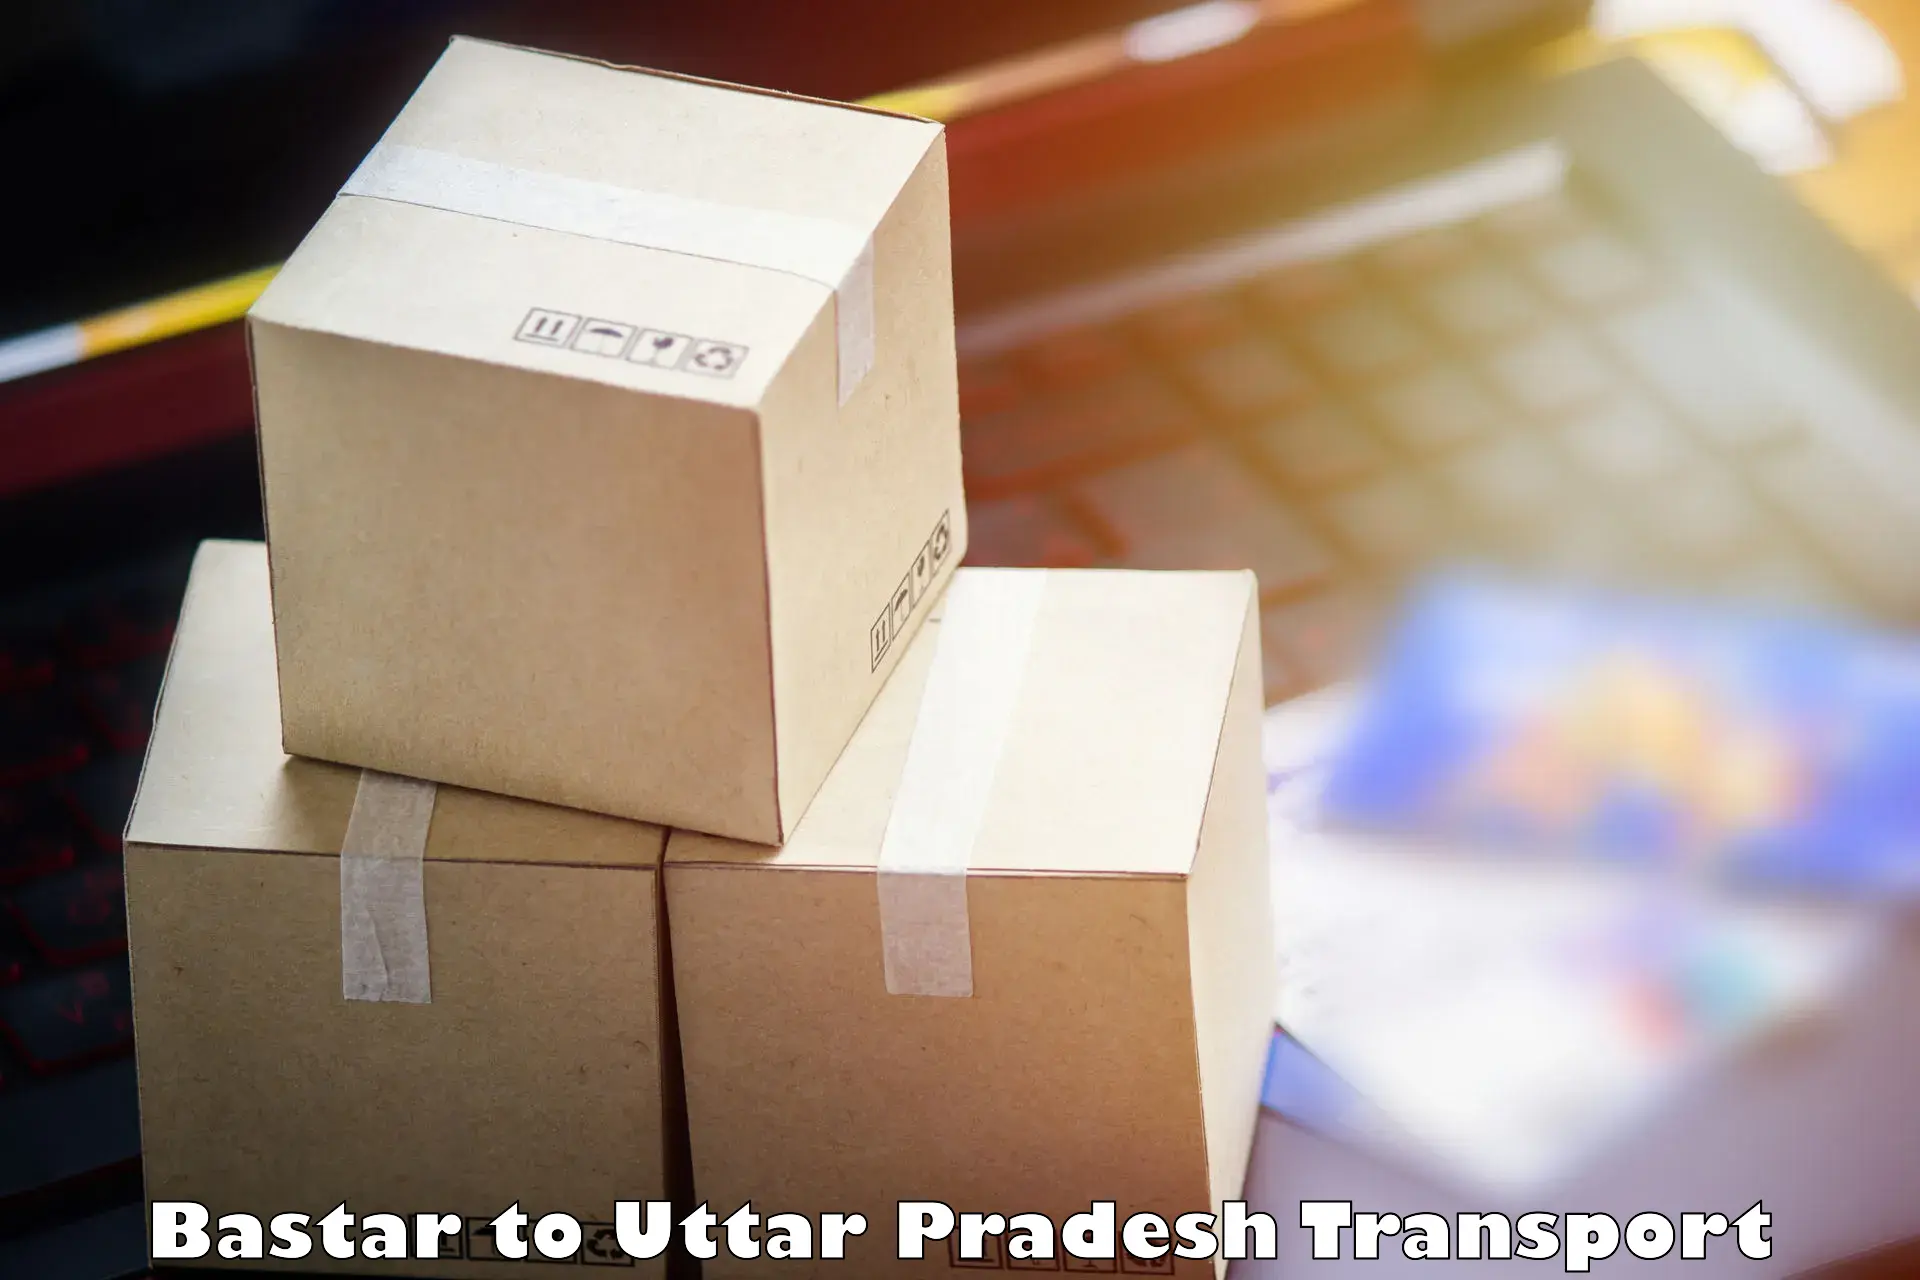 Express transport services Bastar to Sitapur